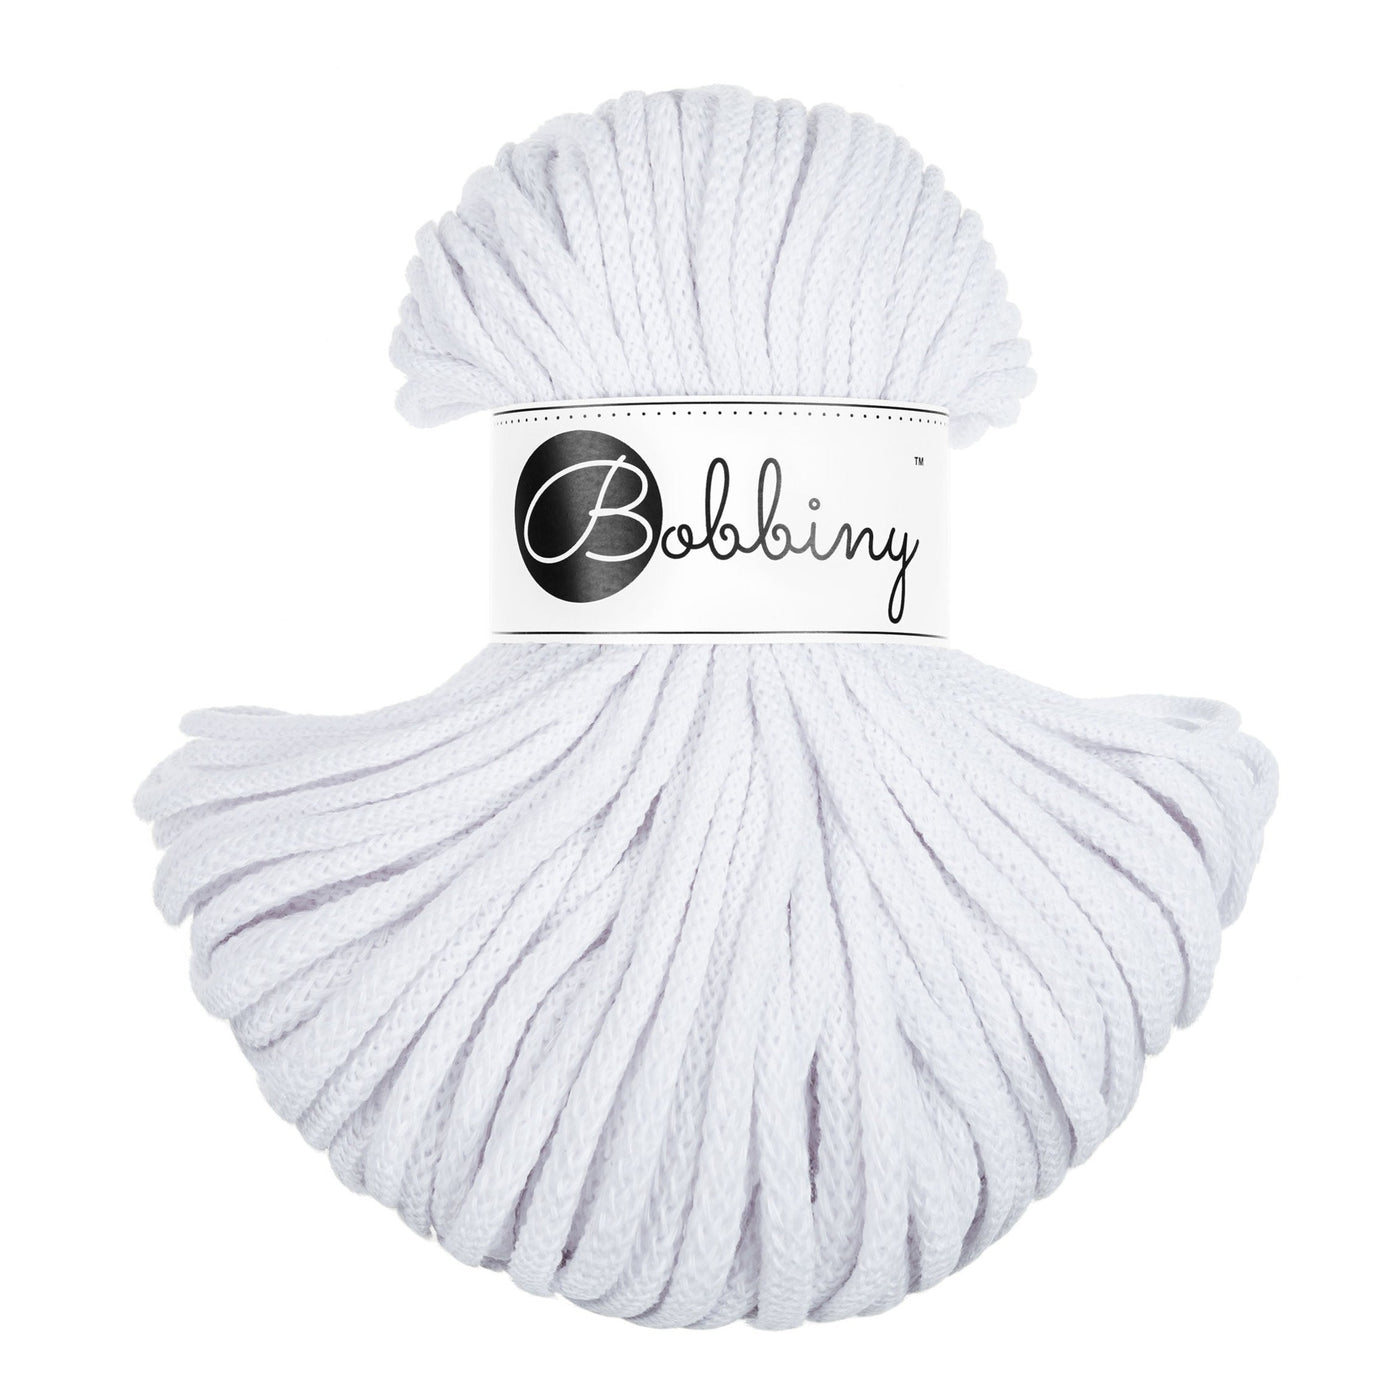 Bobbiny braided cord 5mm 50m in white